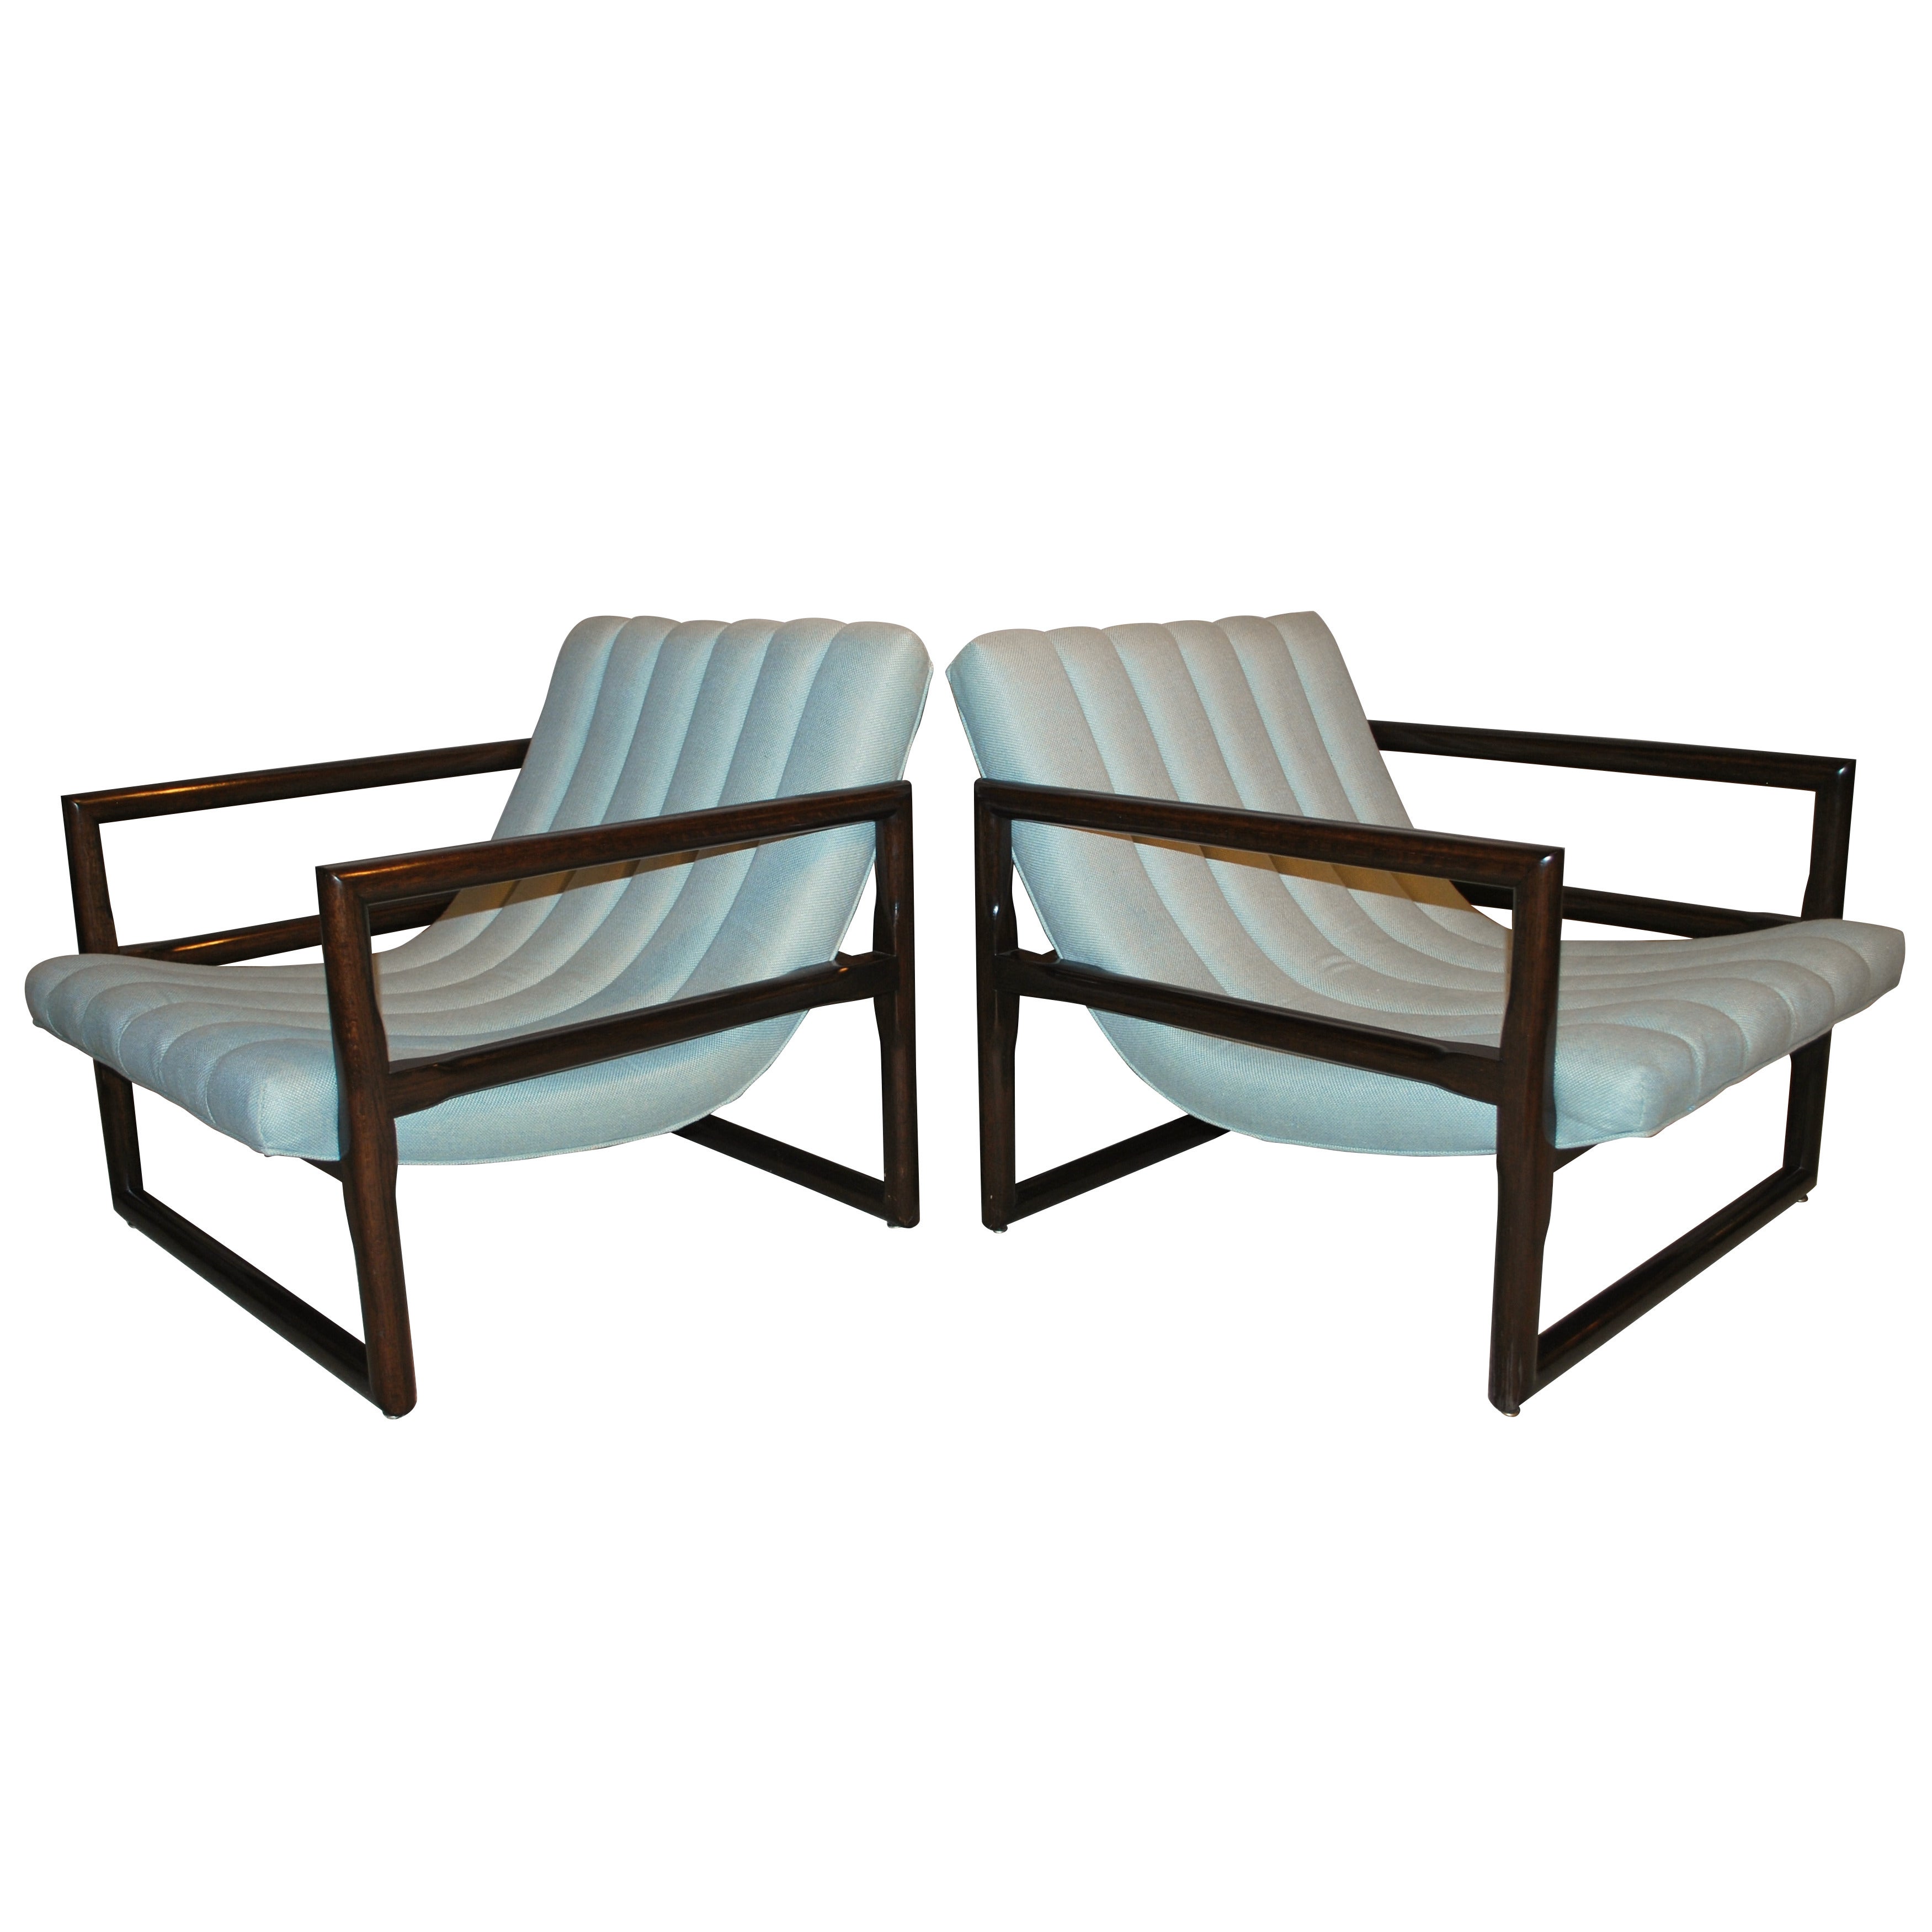 Pair of "Cube" Lounge Chairs